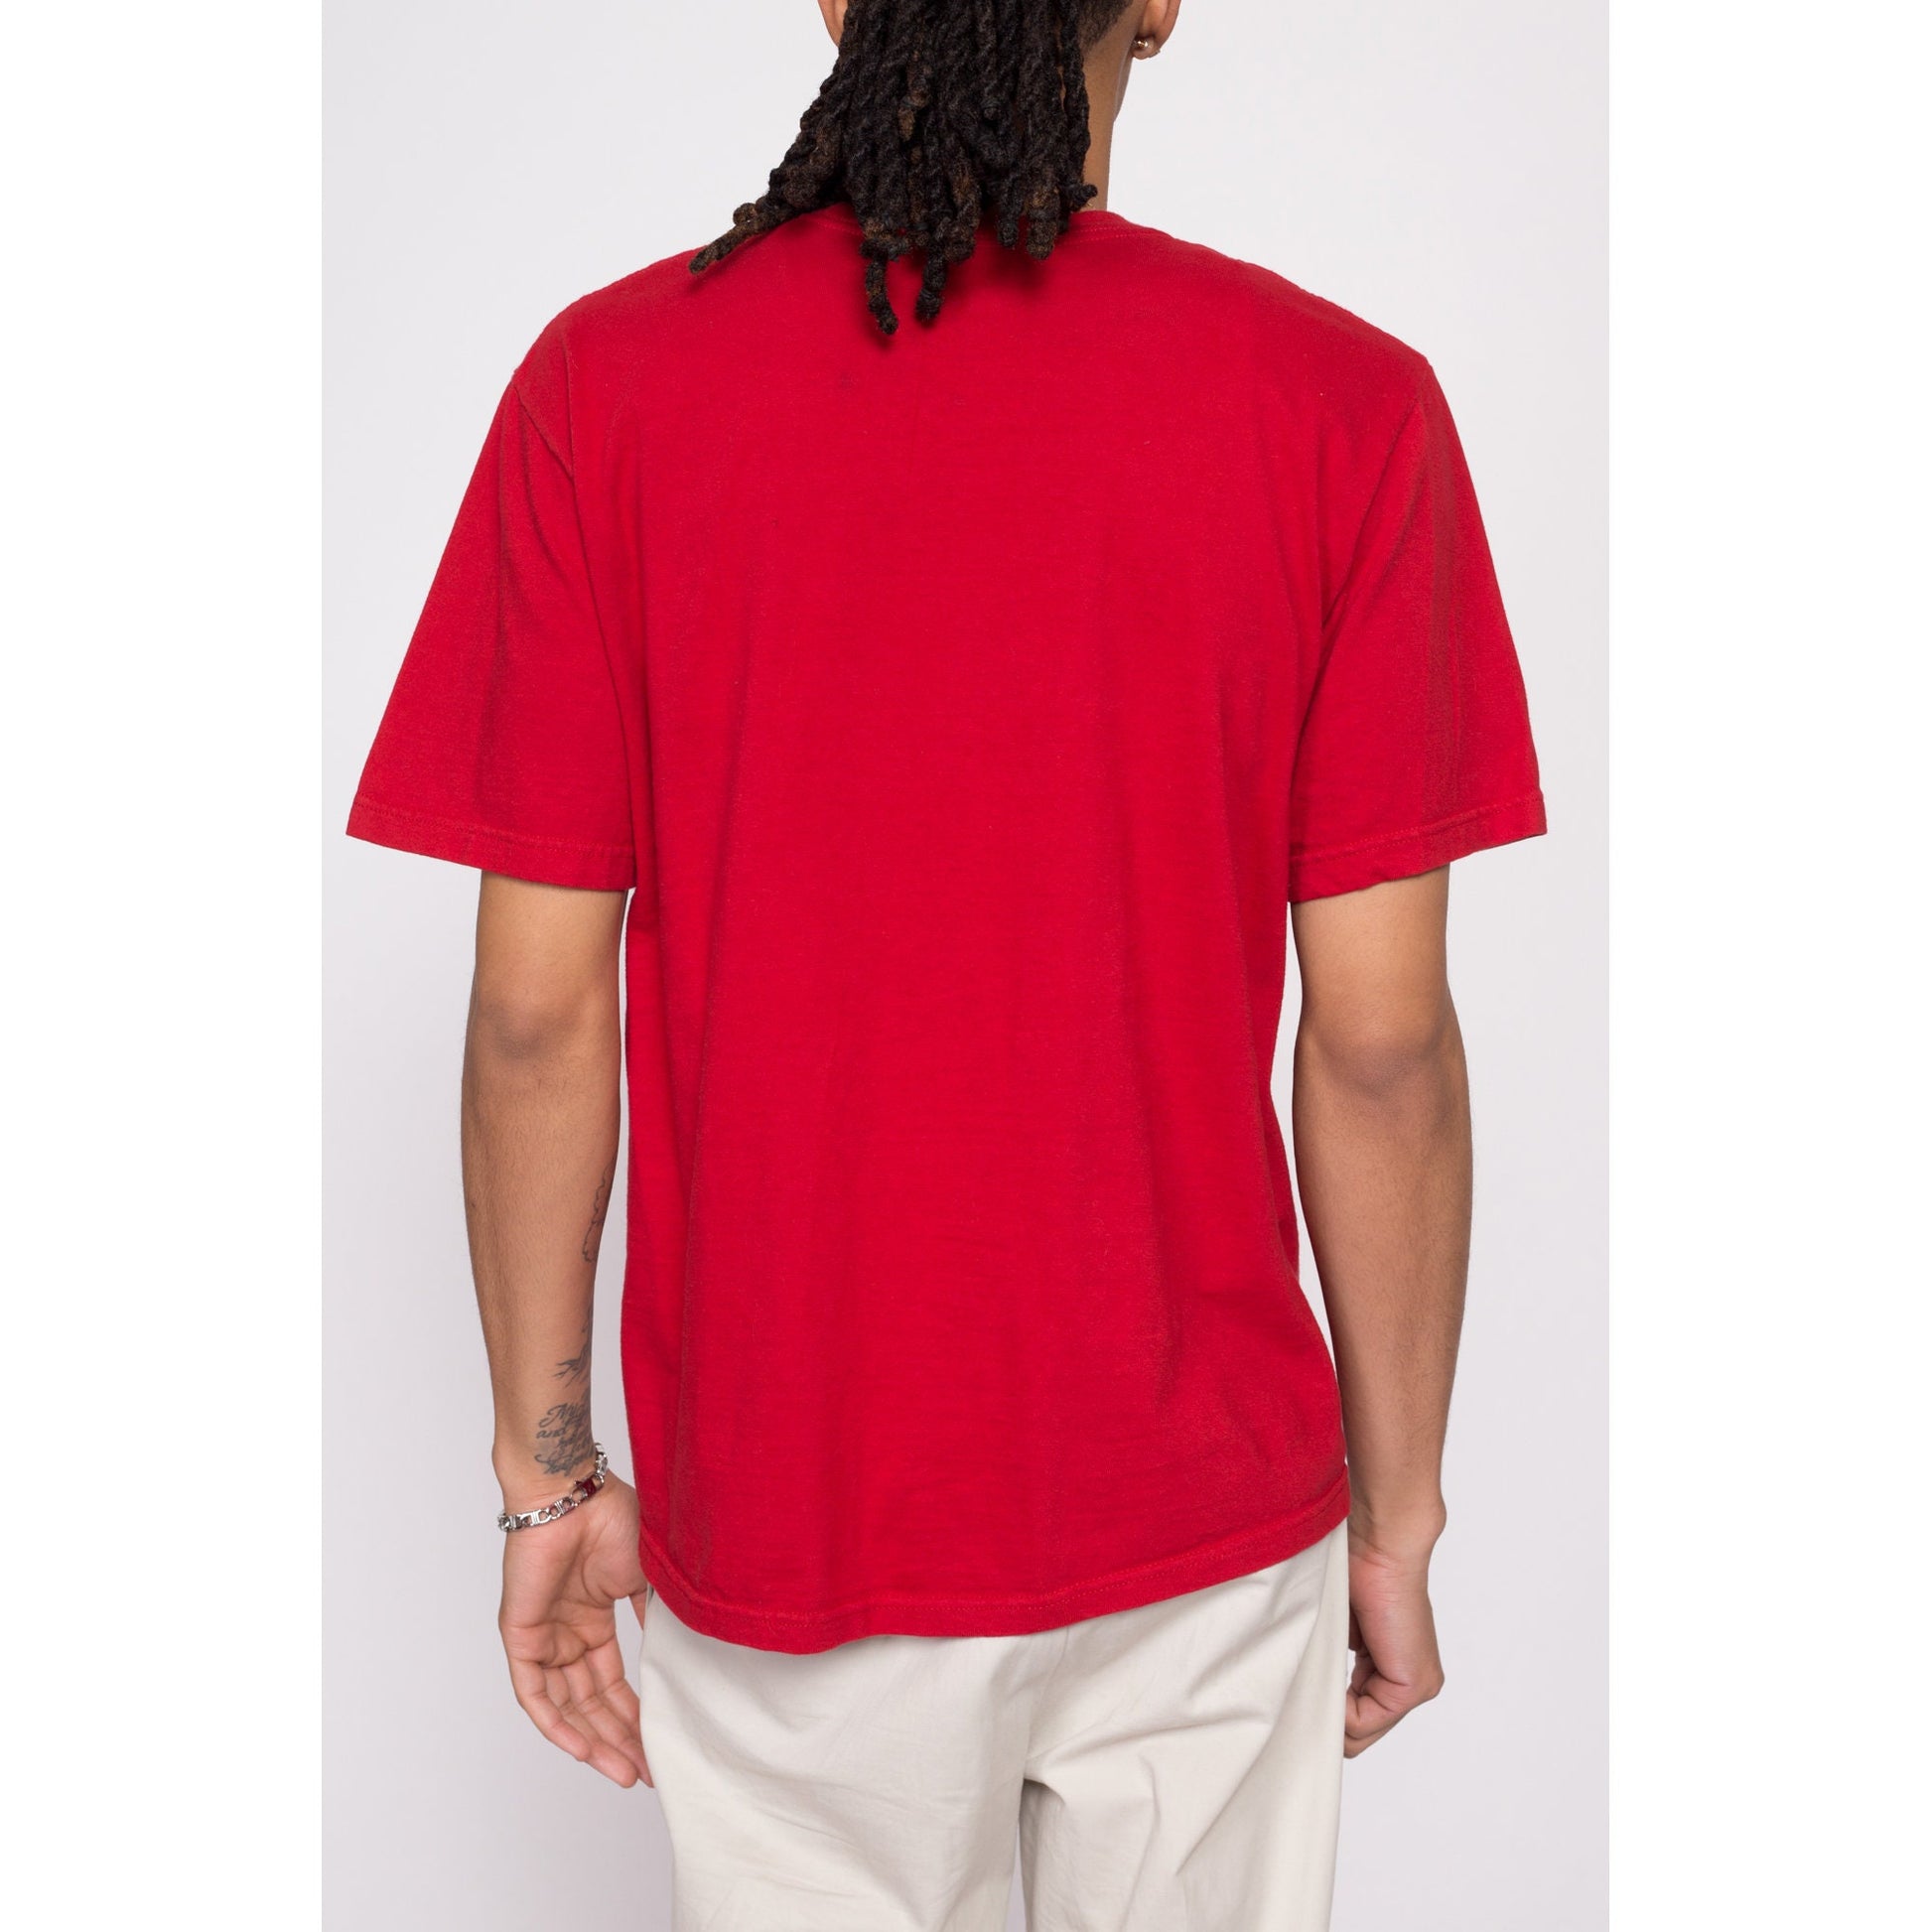 Supreme Prodigy x Hennessy T Shirt - Men's Medium | Authentic Red Rap Graphic Tee